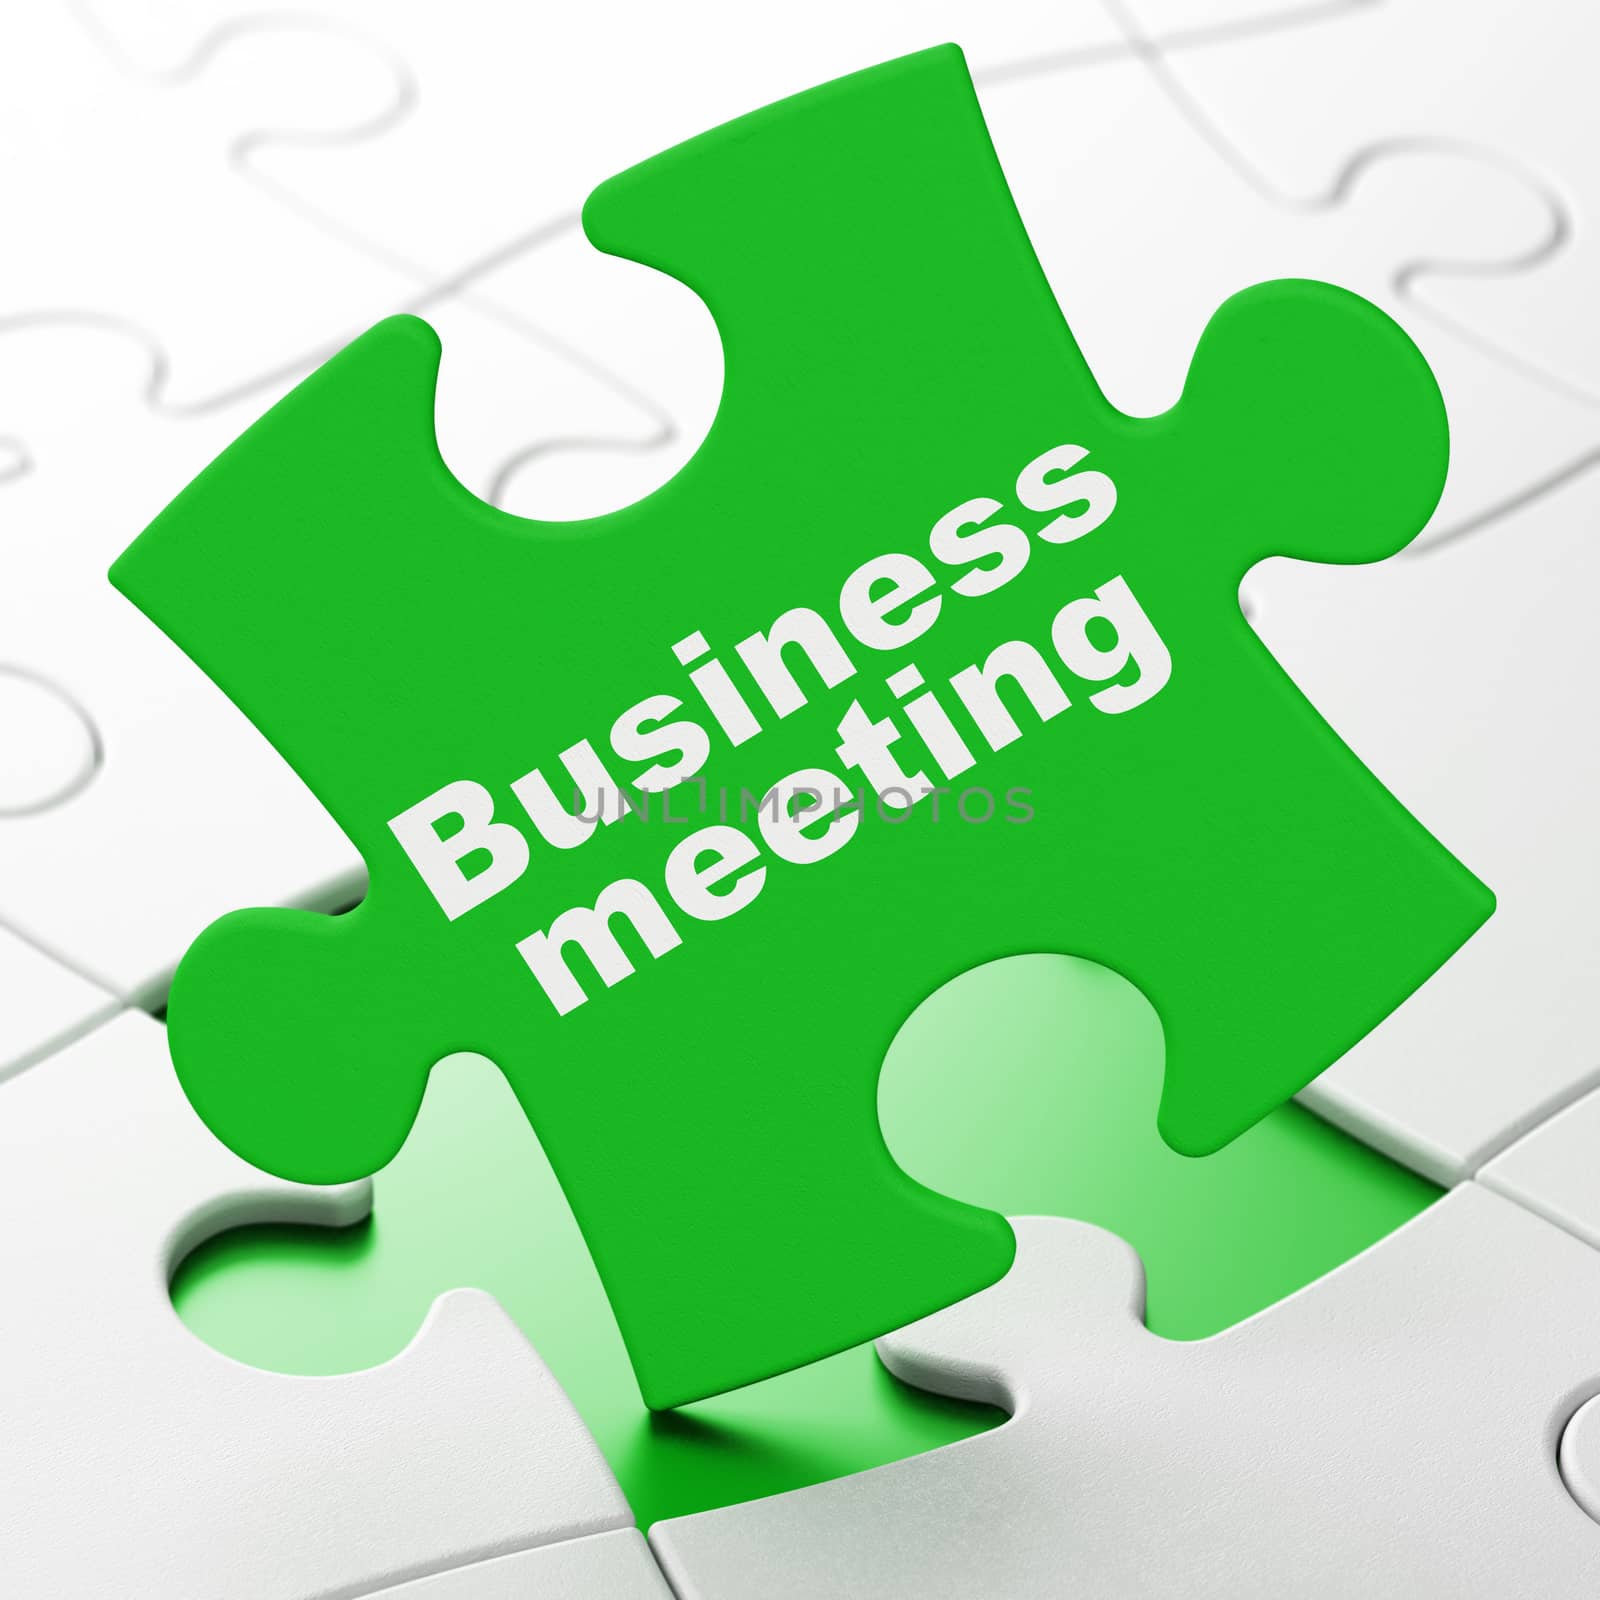 Business concept: Business Meeting on Green puzzle pieces background, 3d render